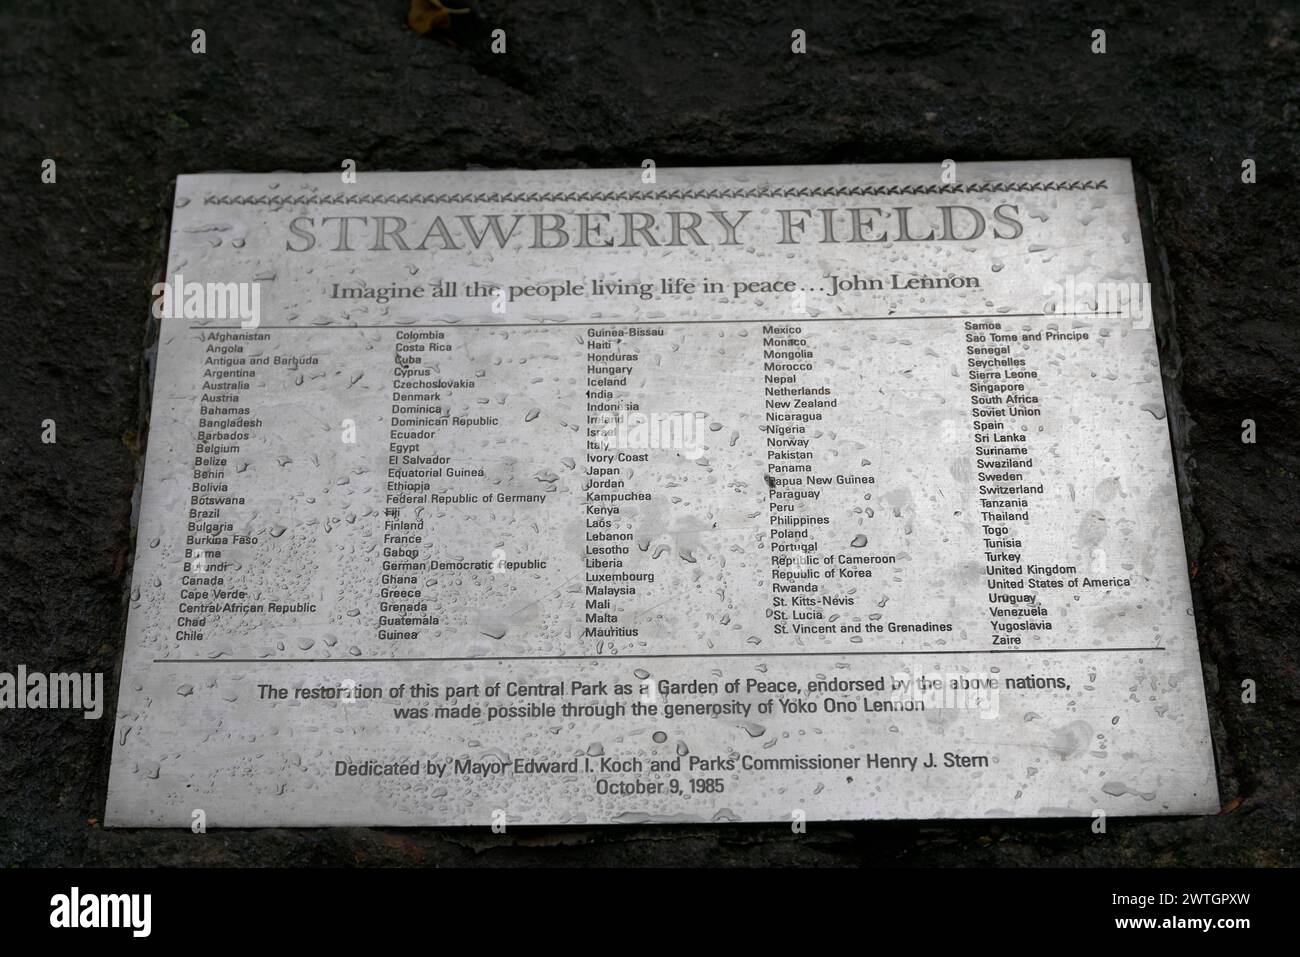 Central Park, Memorial plaque for Strawberry Fields in Central Park, dedicated to John Lennon, Manhattan, New York City, New York, USA, North America Stock Photo